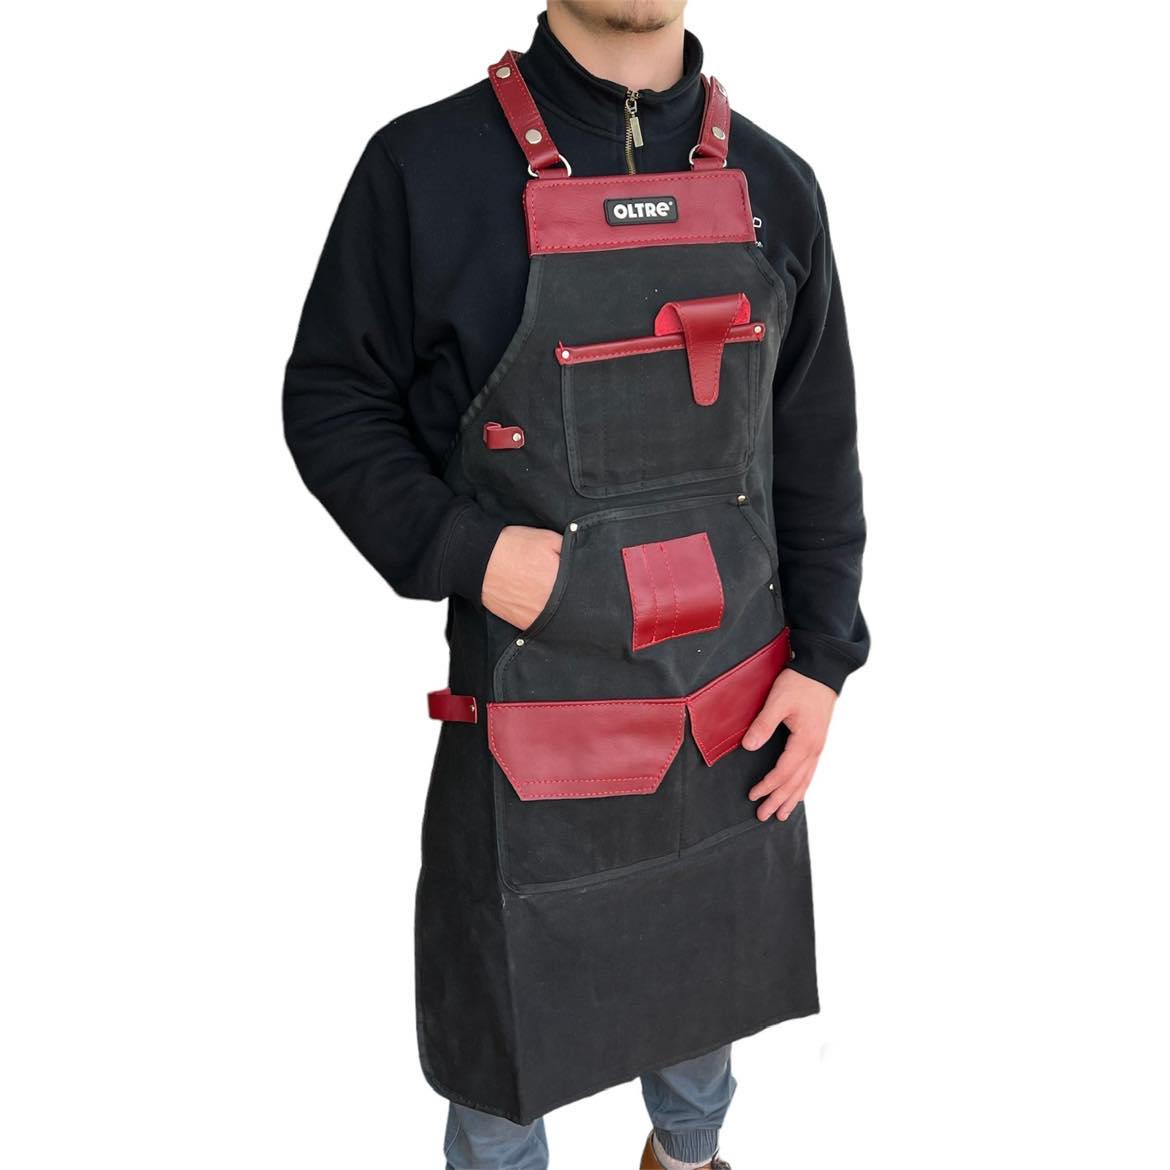 Black Canvas With Red Leather Apron By Oltre *New Arrival*